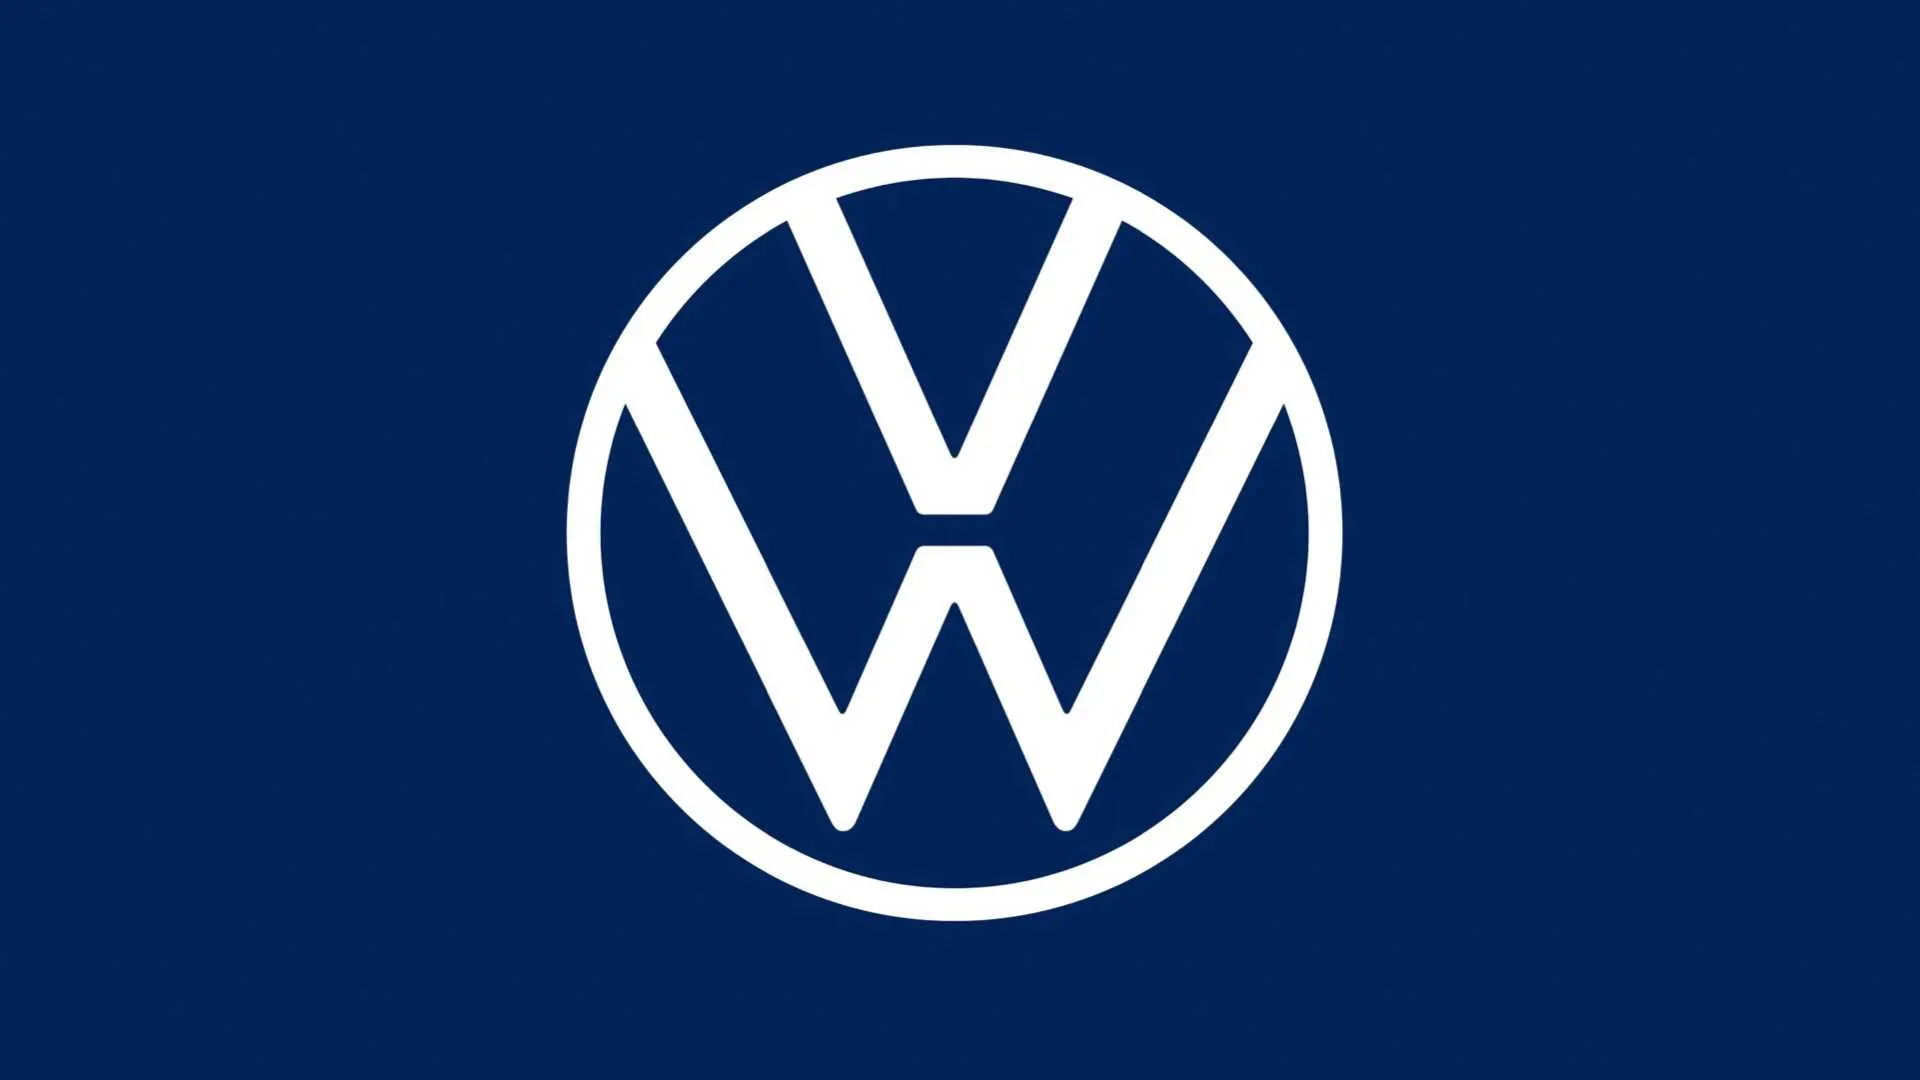 Volkswagen Group And Xanadu Partners To Increase The Performance Of Quantum Algorithms For Modeling Battery Materials